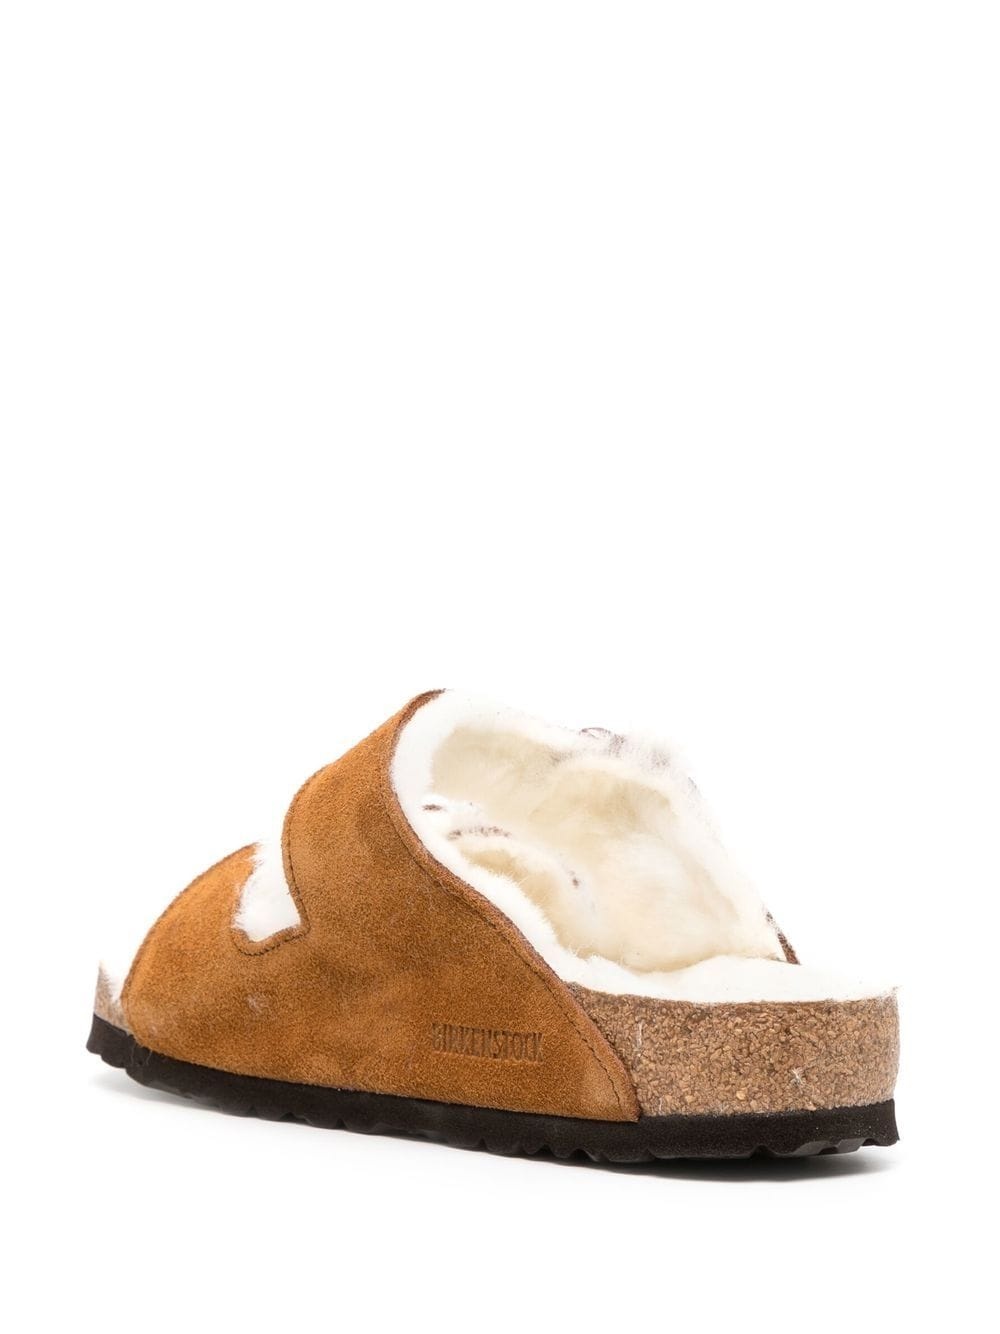 shearling-lined slip-on sandals - 3